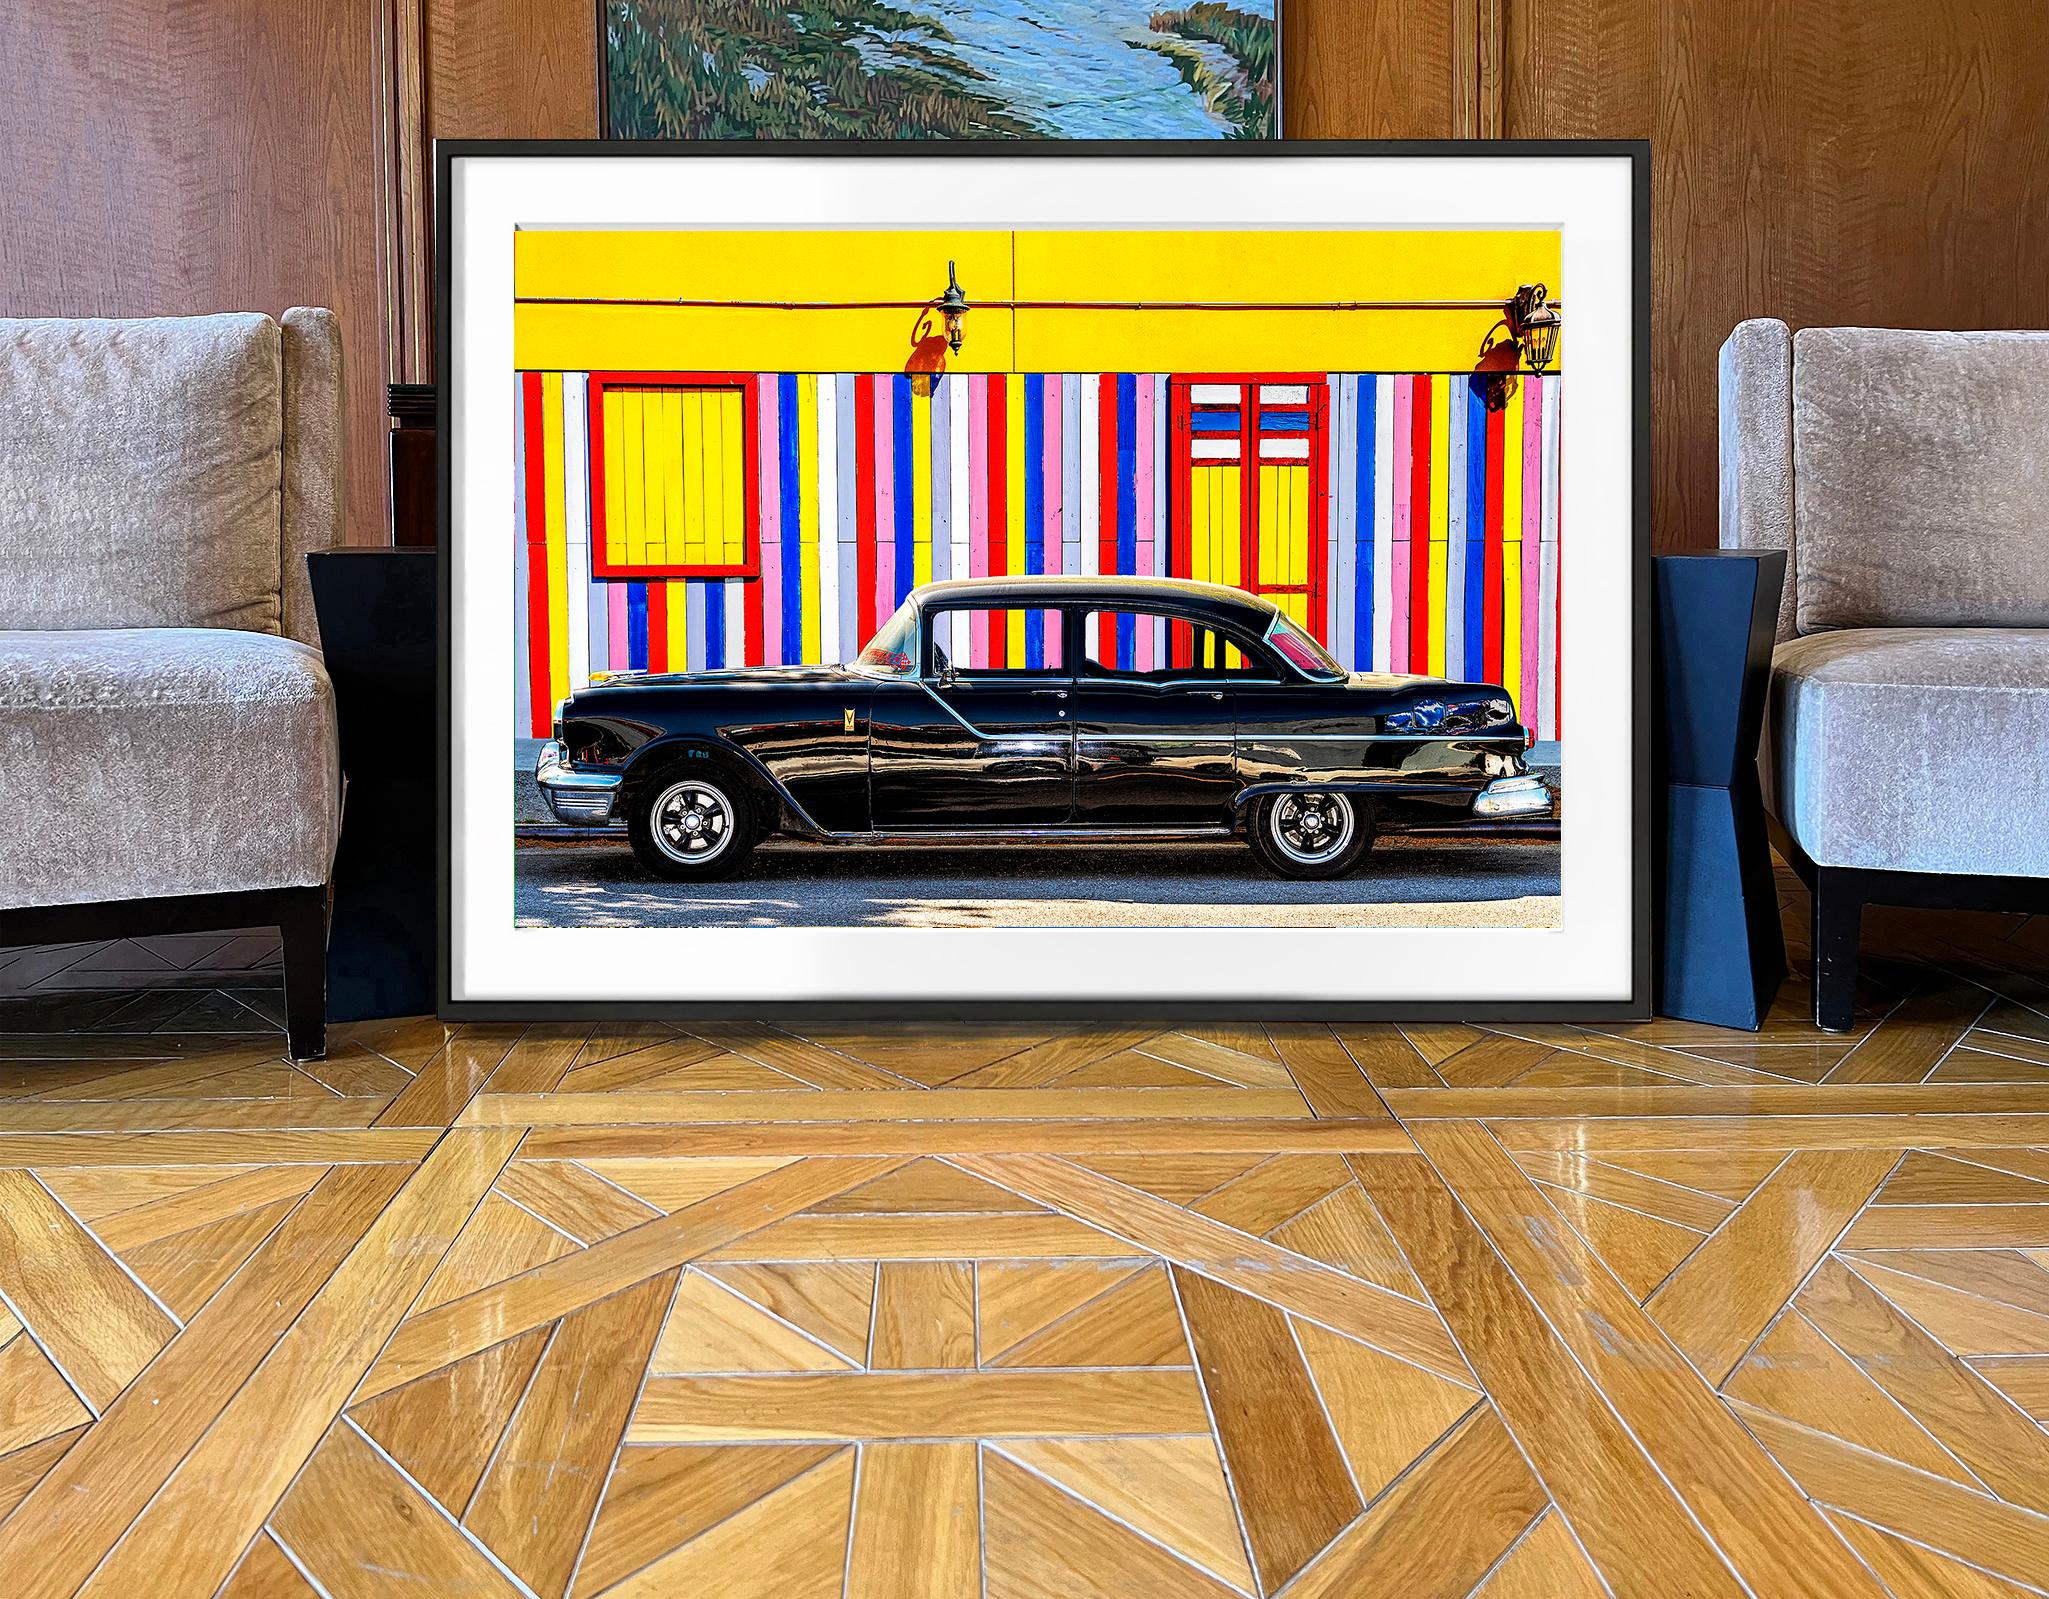 Vintage Car Against Colorful Striped  Yellow Wall   - Primary Colors - Abstract Geometric Photograph by Mitchell Funk